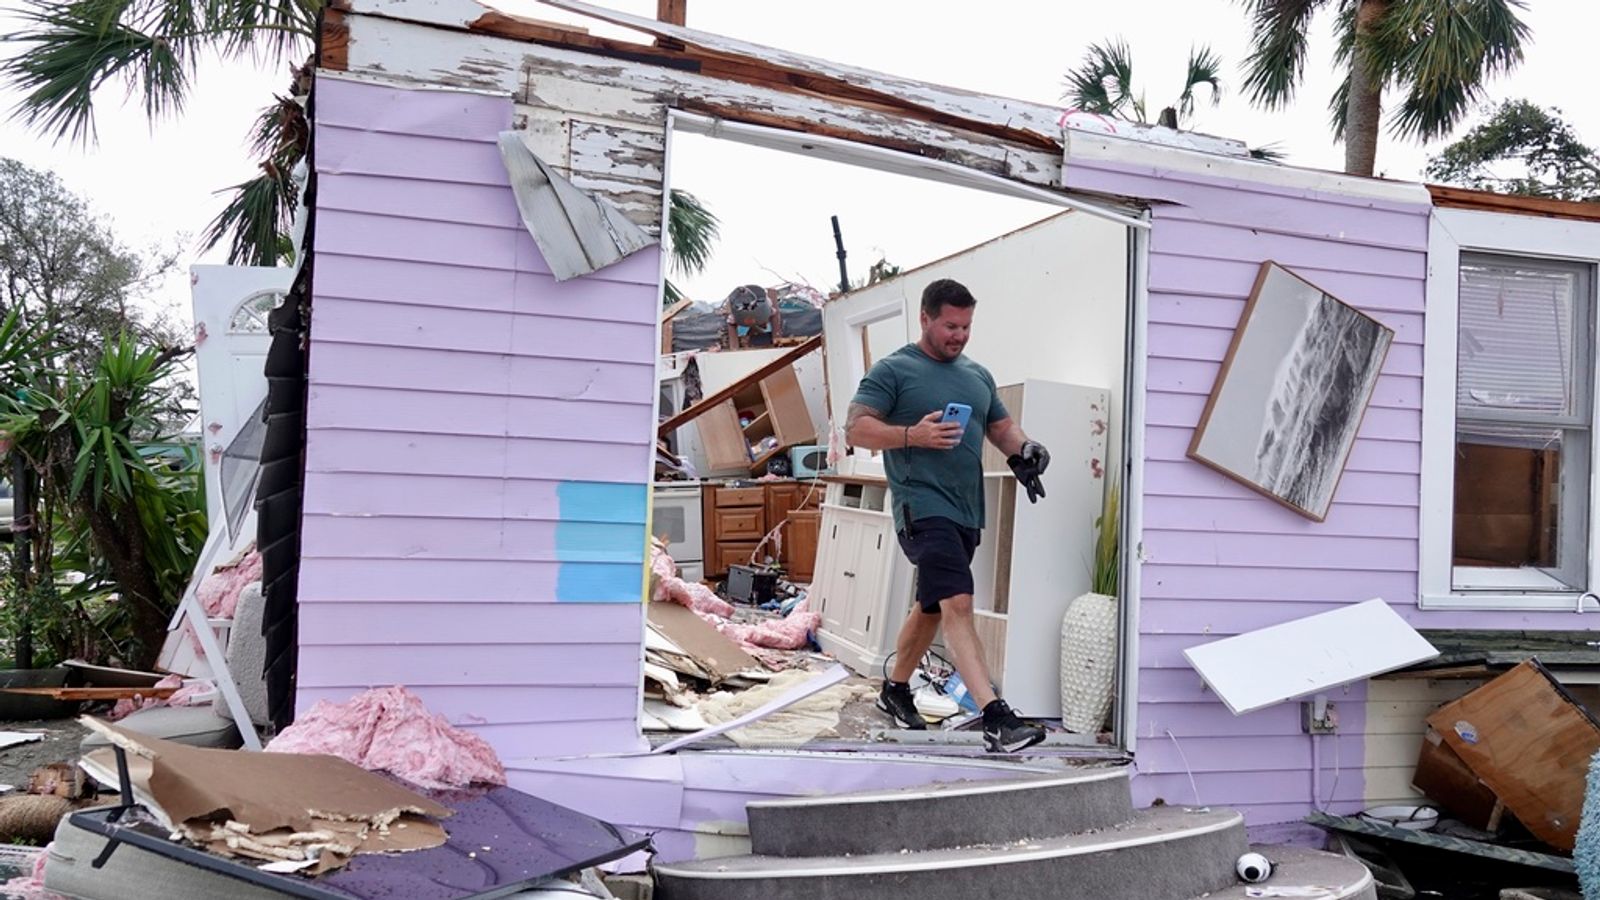 Palm Beach Tornado Wind flips cars and damages homes in coastal